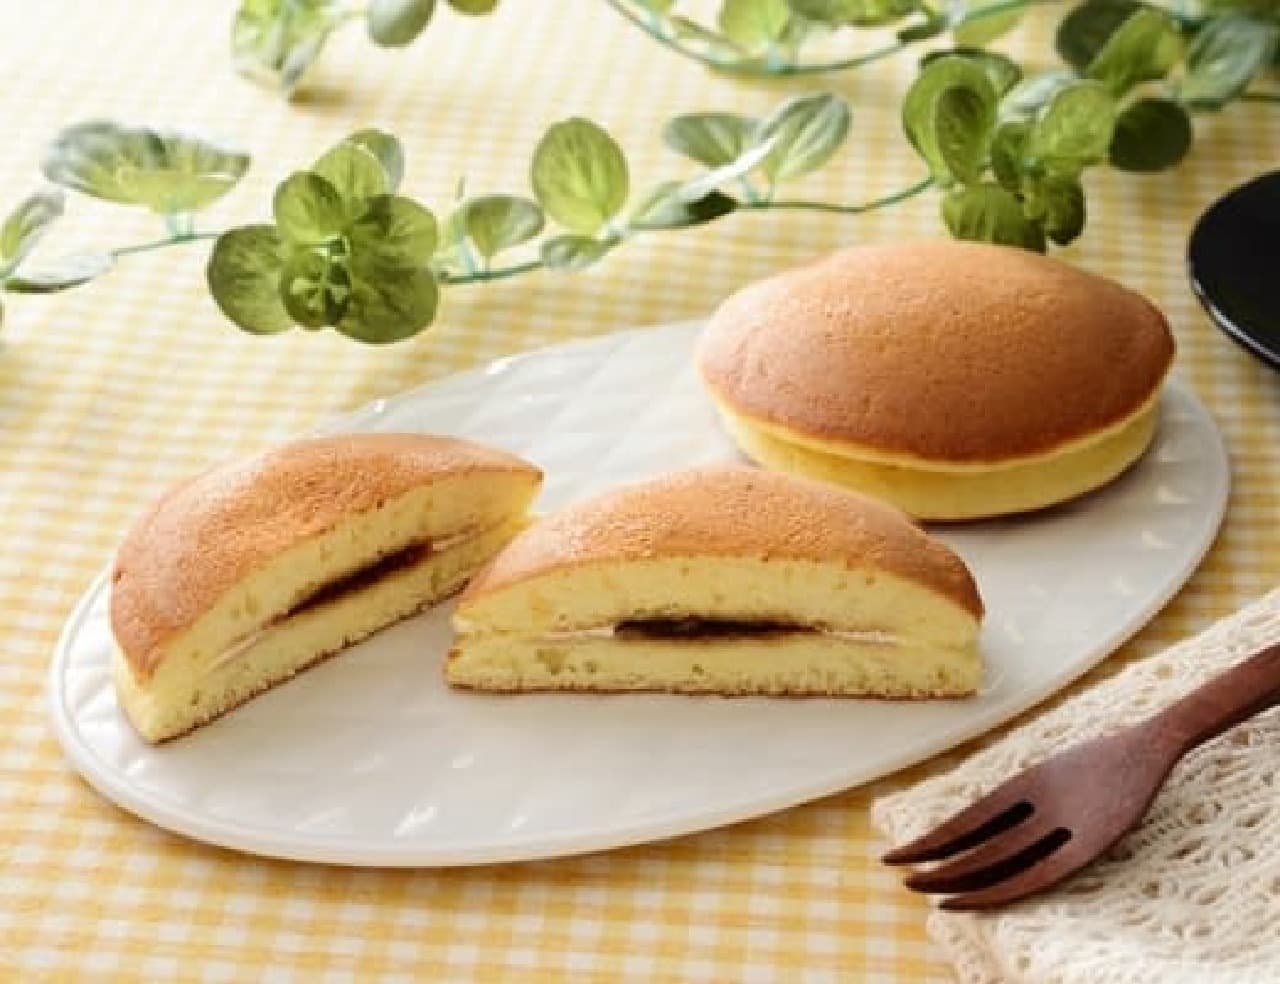 Lawson "Fluffy hot cake with domestic flour 2 pieces"